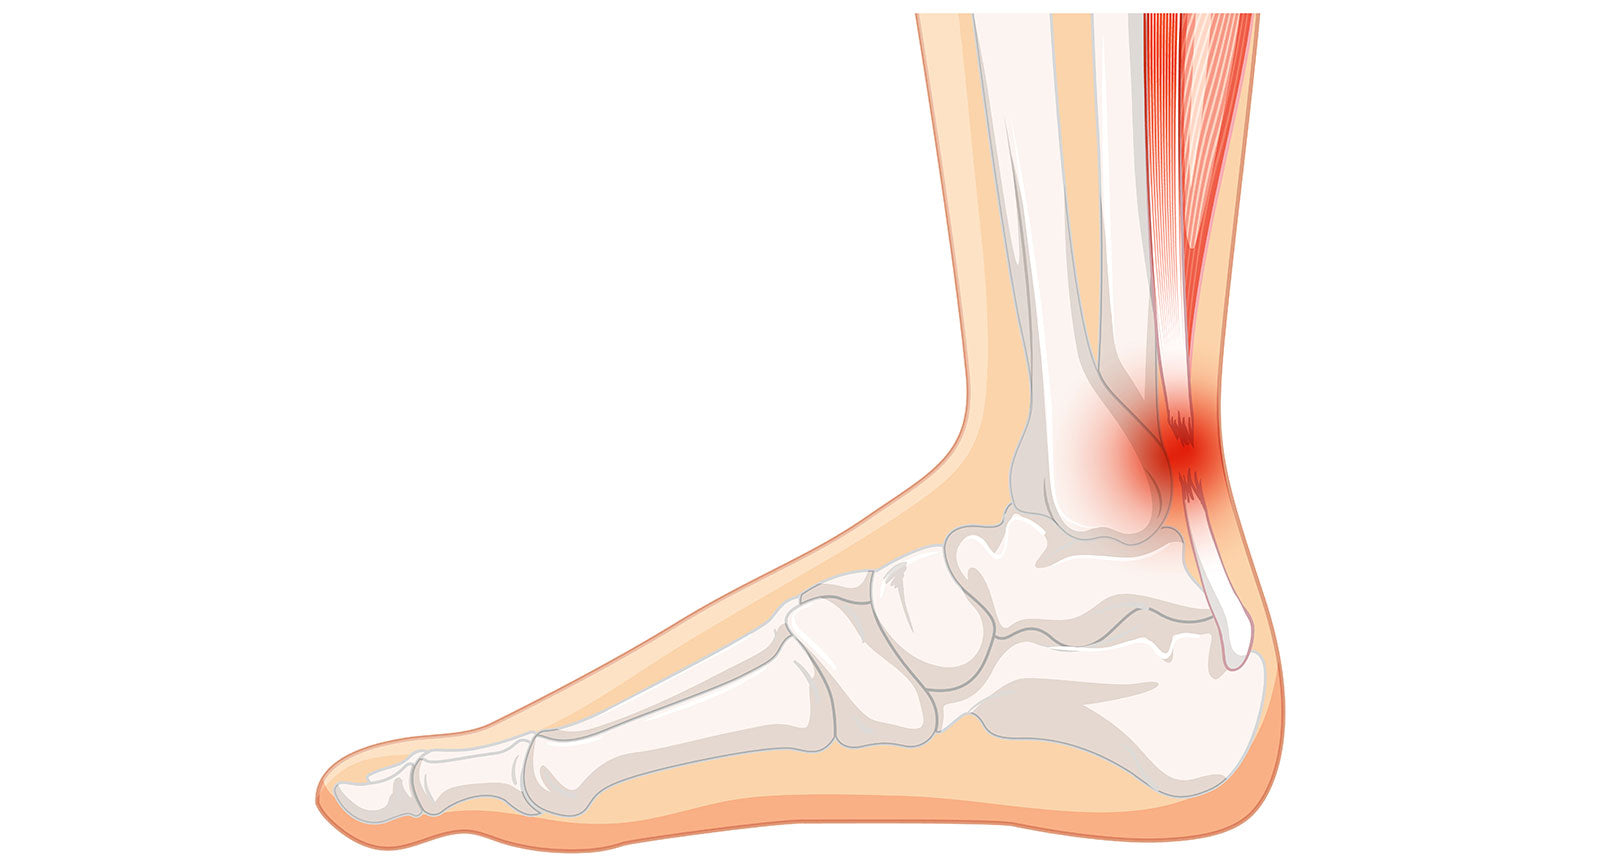 What causes foot pain? Related conditions and treatments